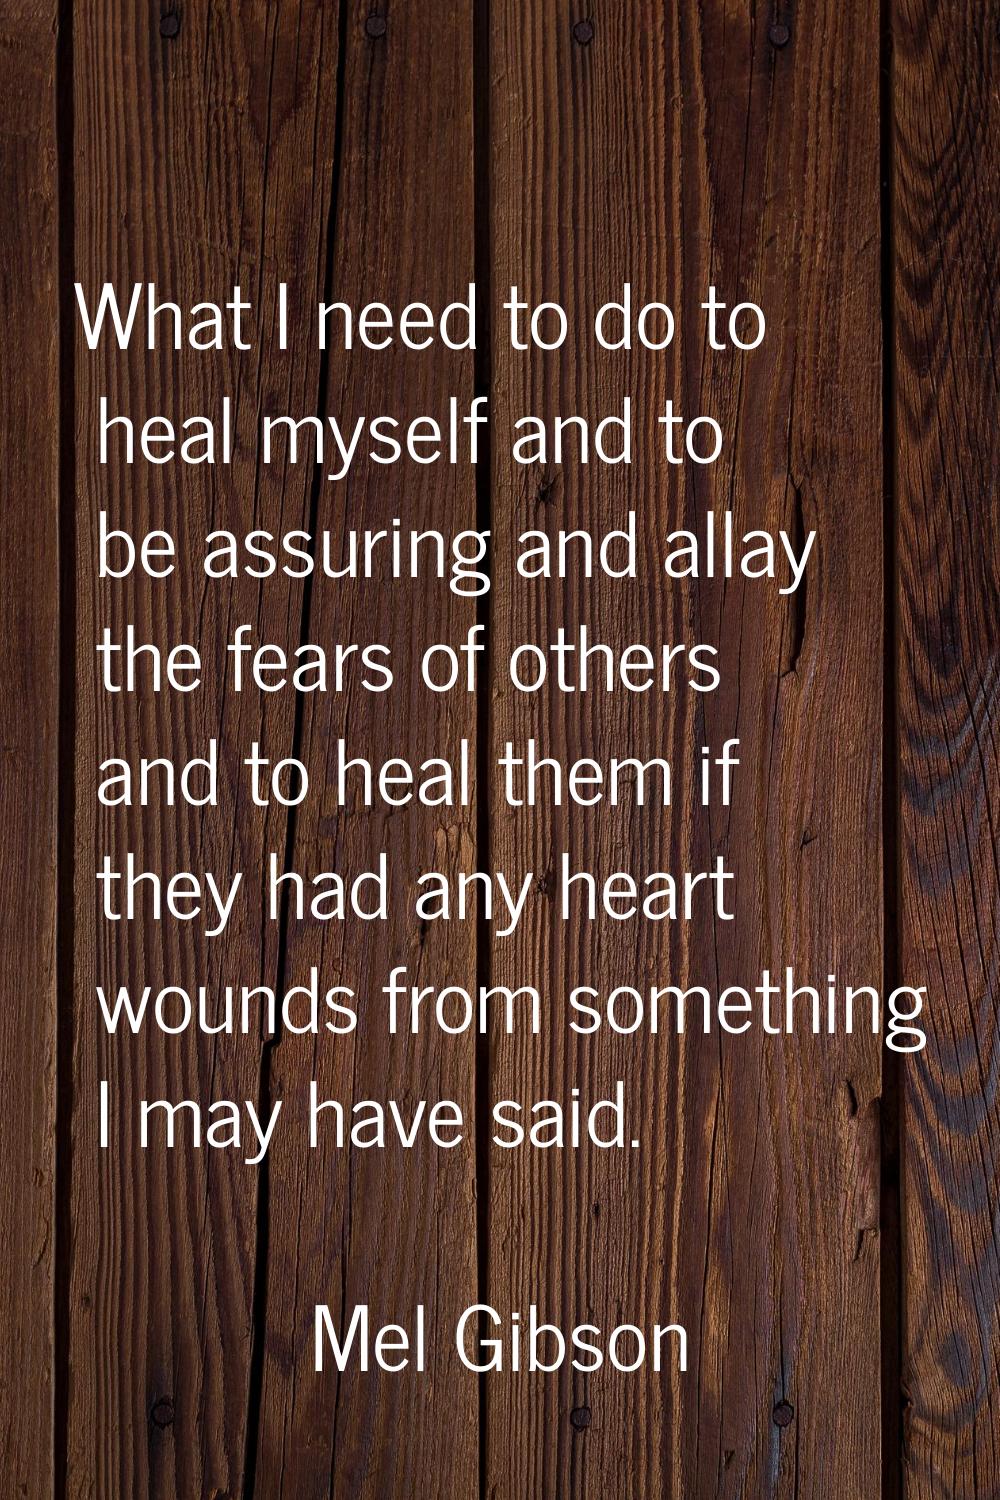 What I need to do to heal myself and to be assuring and allay the fears of others and to heal them 